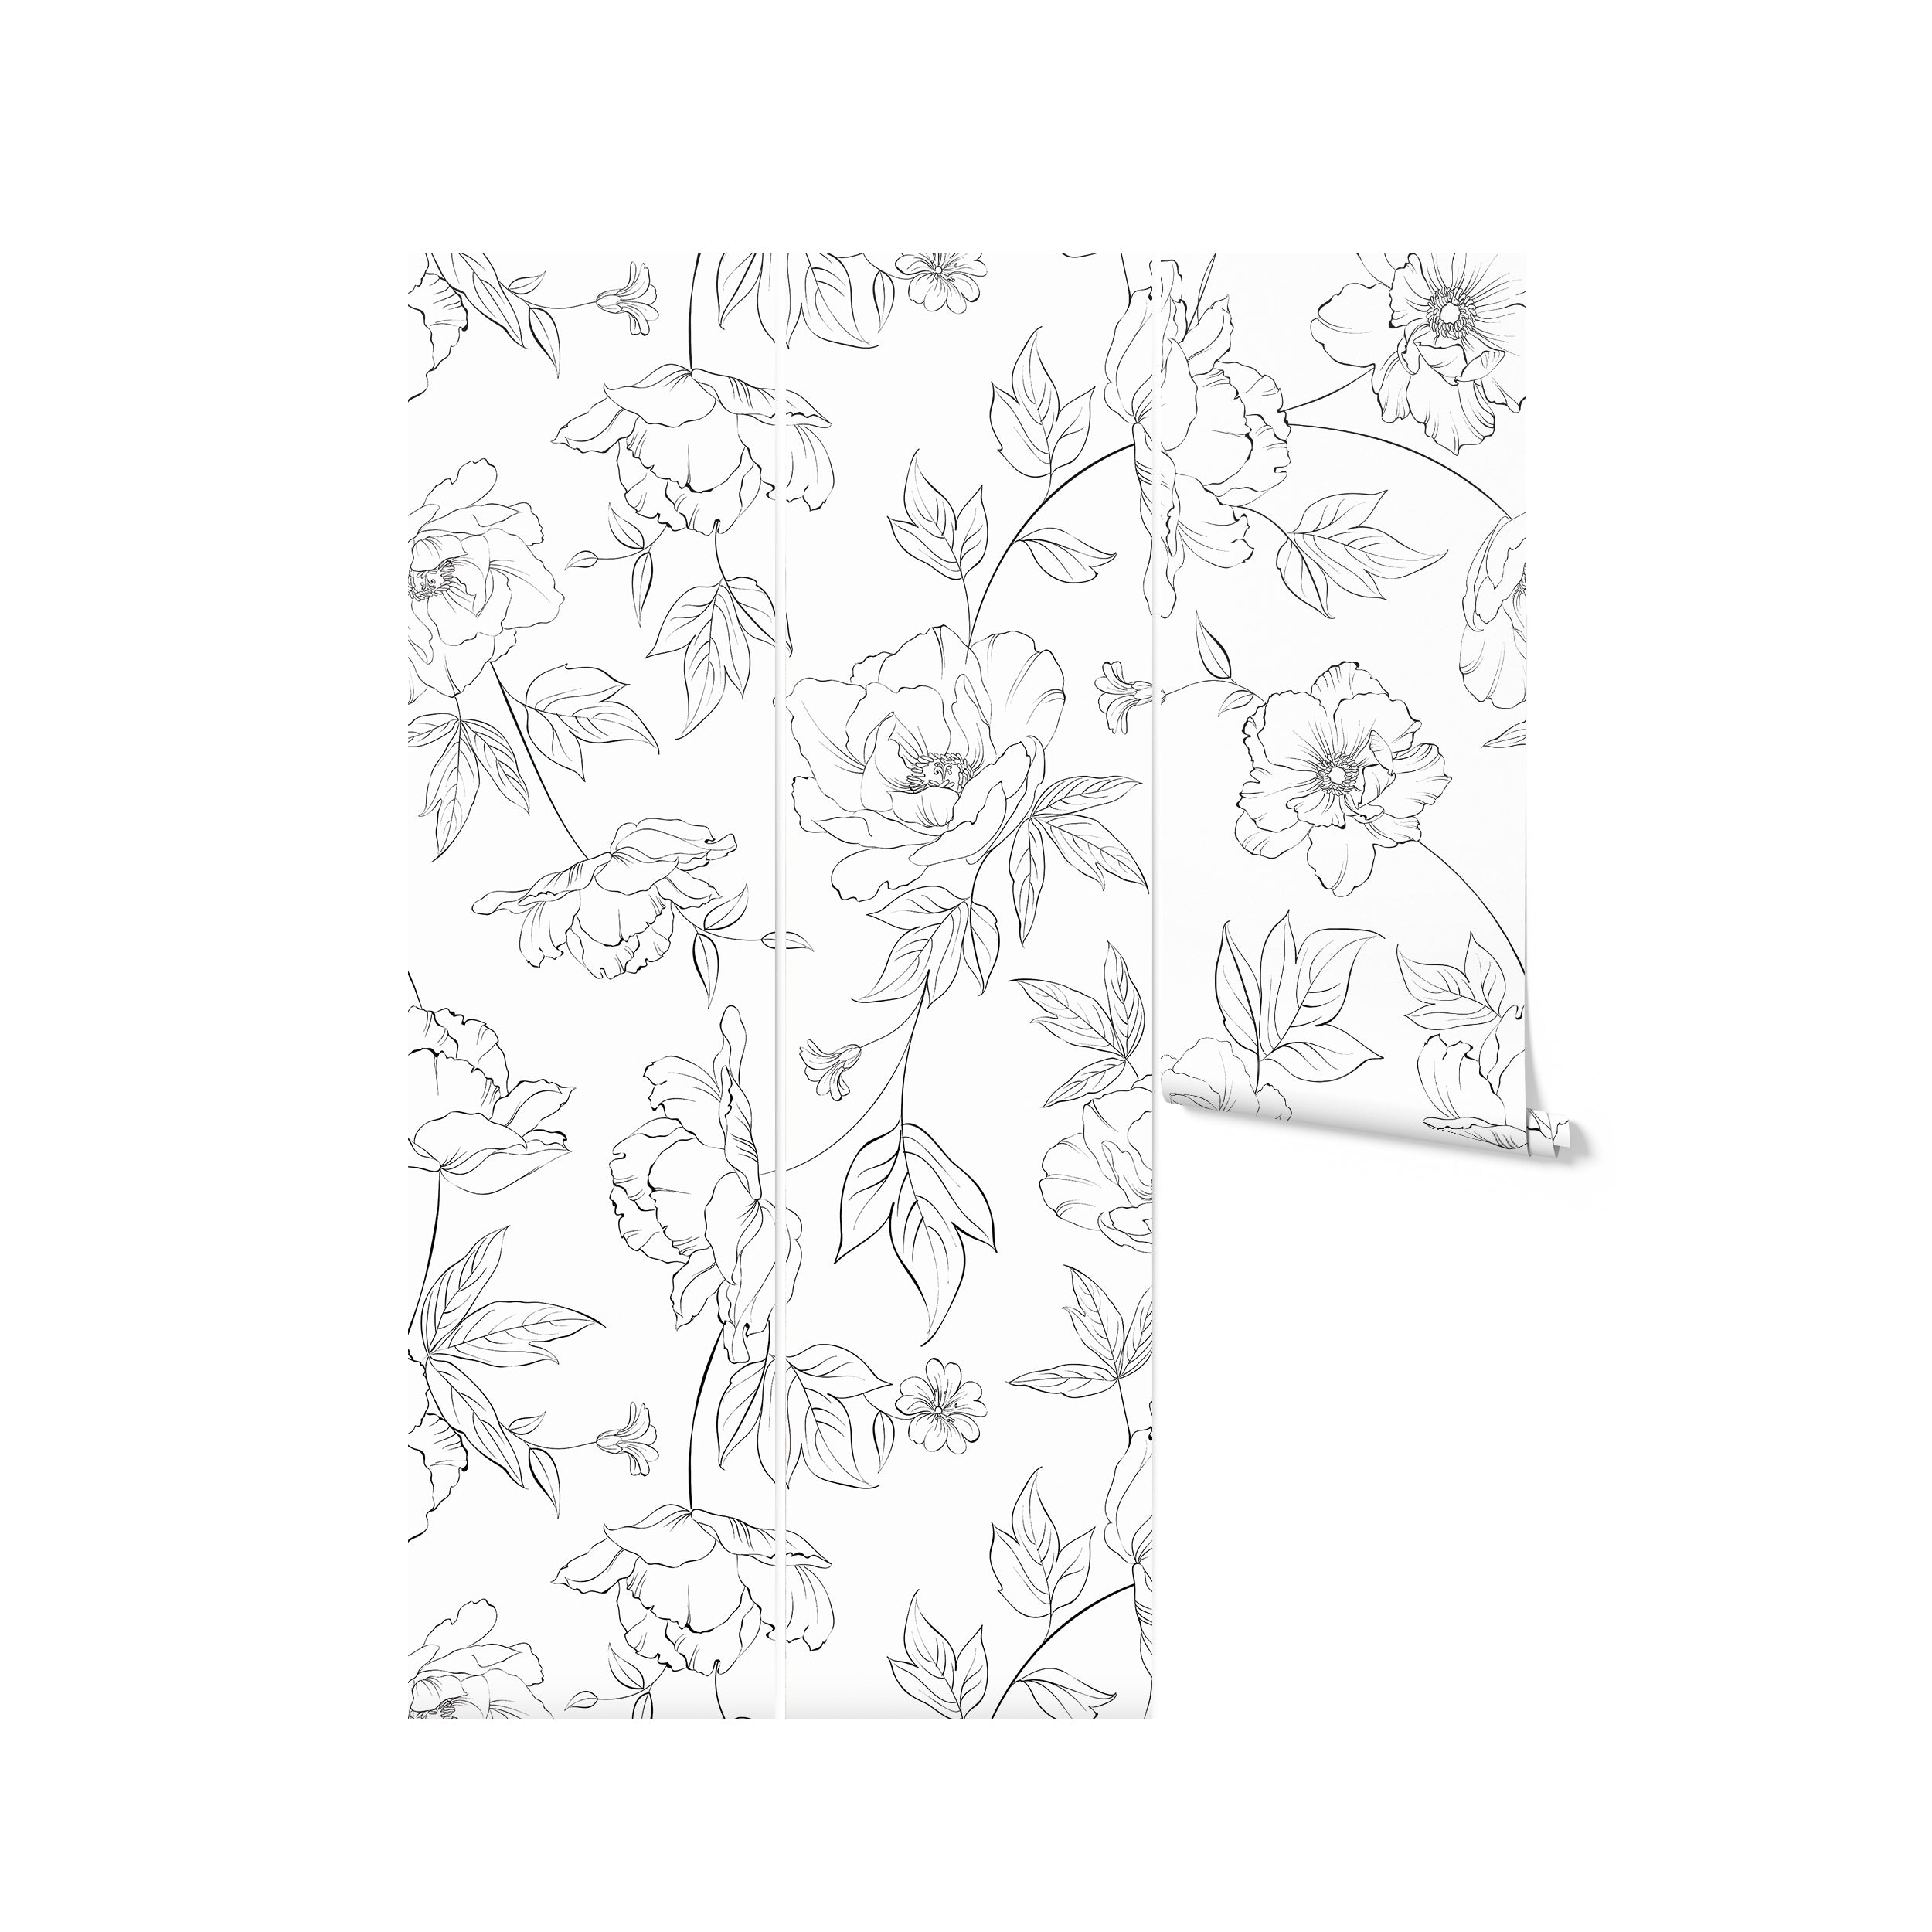 Dainty Floral Line Wallpaper - Extra Large displayed in three vertical panels, showcasing the elegant and detailed black and white floral line art design on a light background, perfect for adding a touch of sophistication to any room.